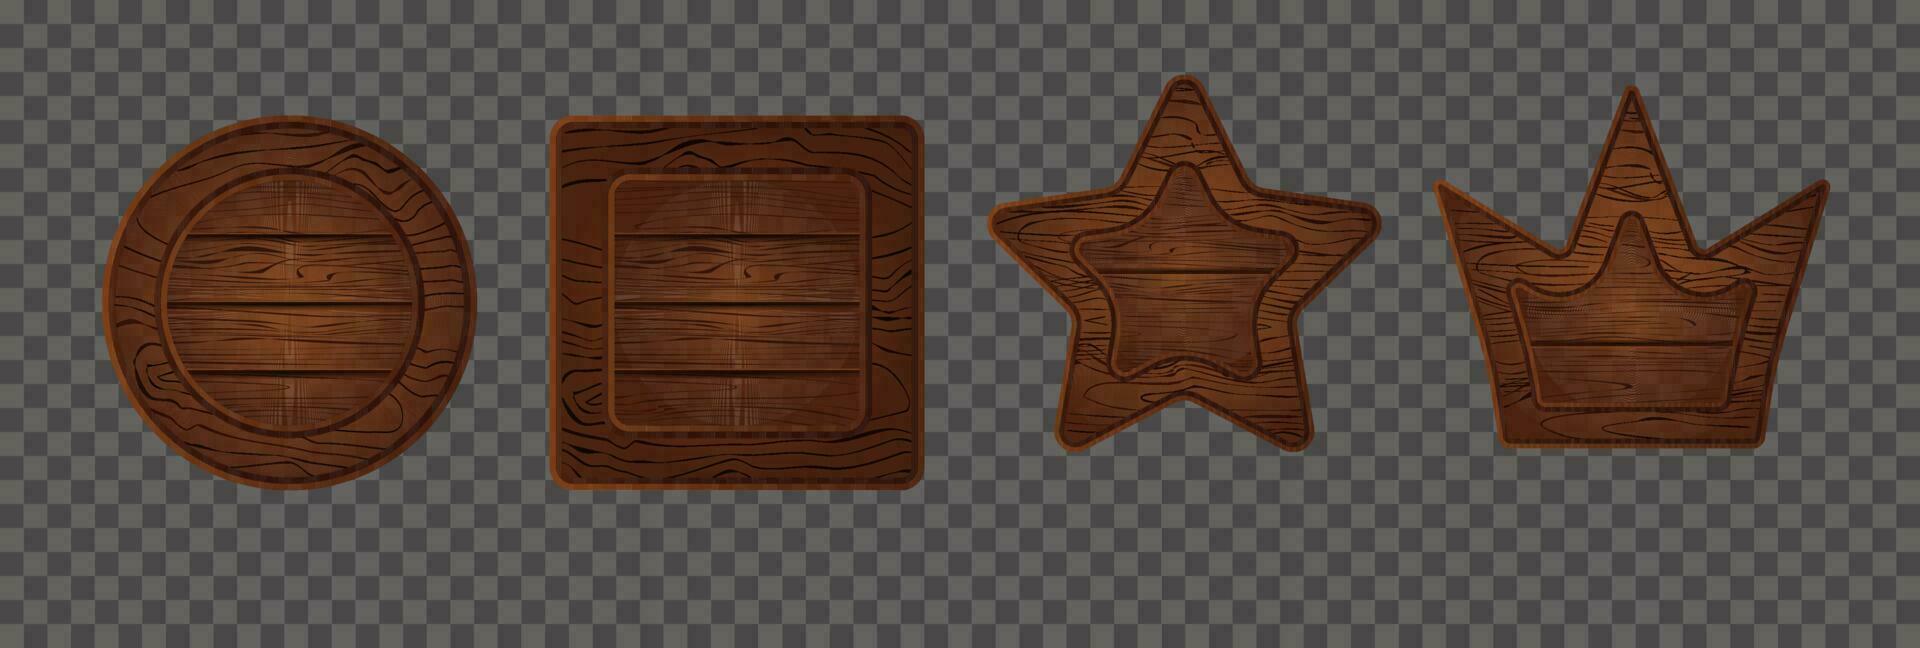 Cartoon vector wooden crown game sign board. Wood texture star and round shape button plank isolated. Ui interface icon menu kit. Blank medieval signpost illustration